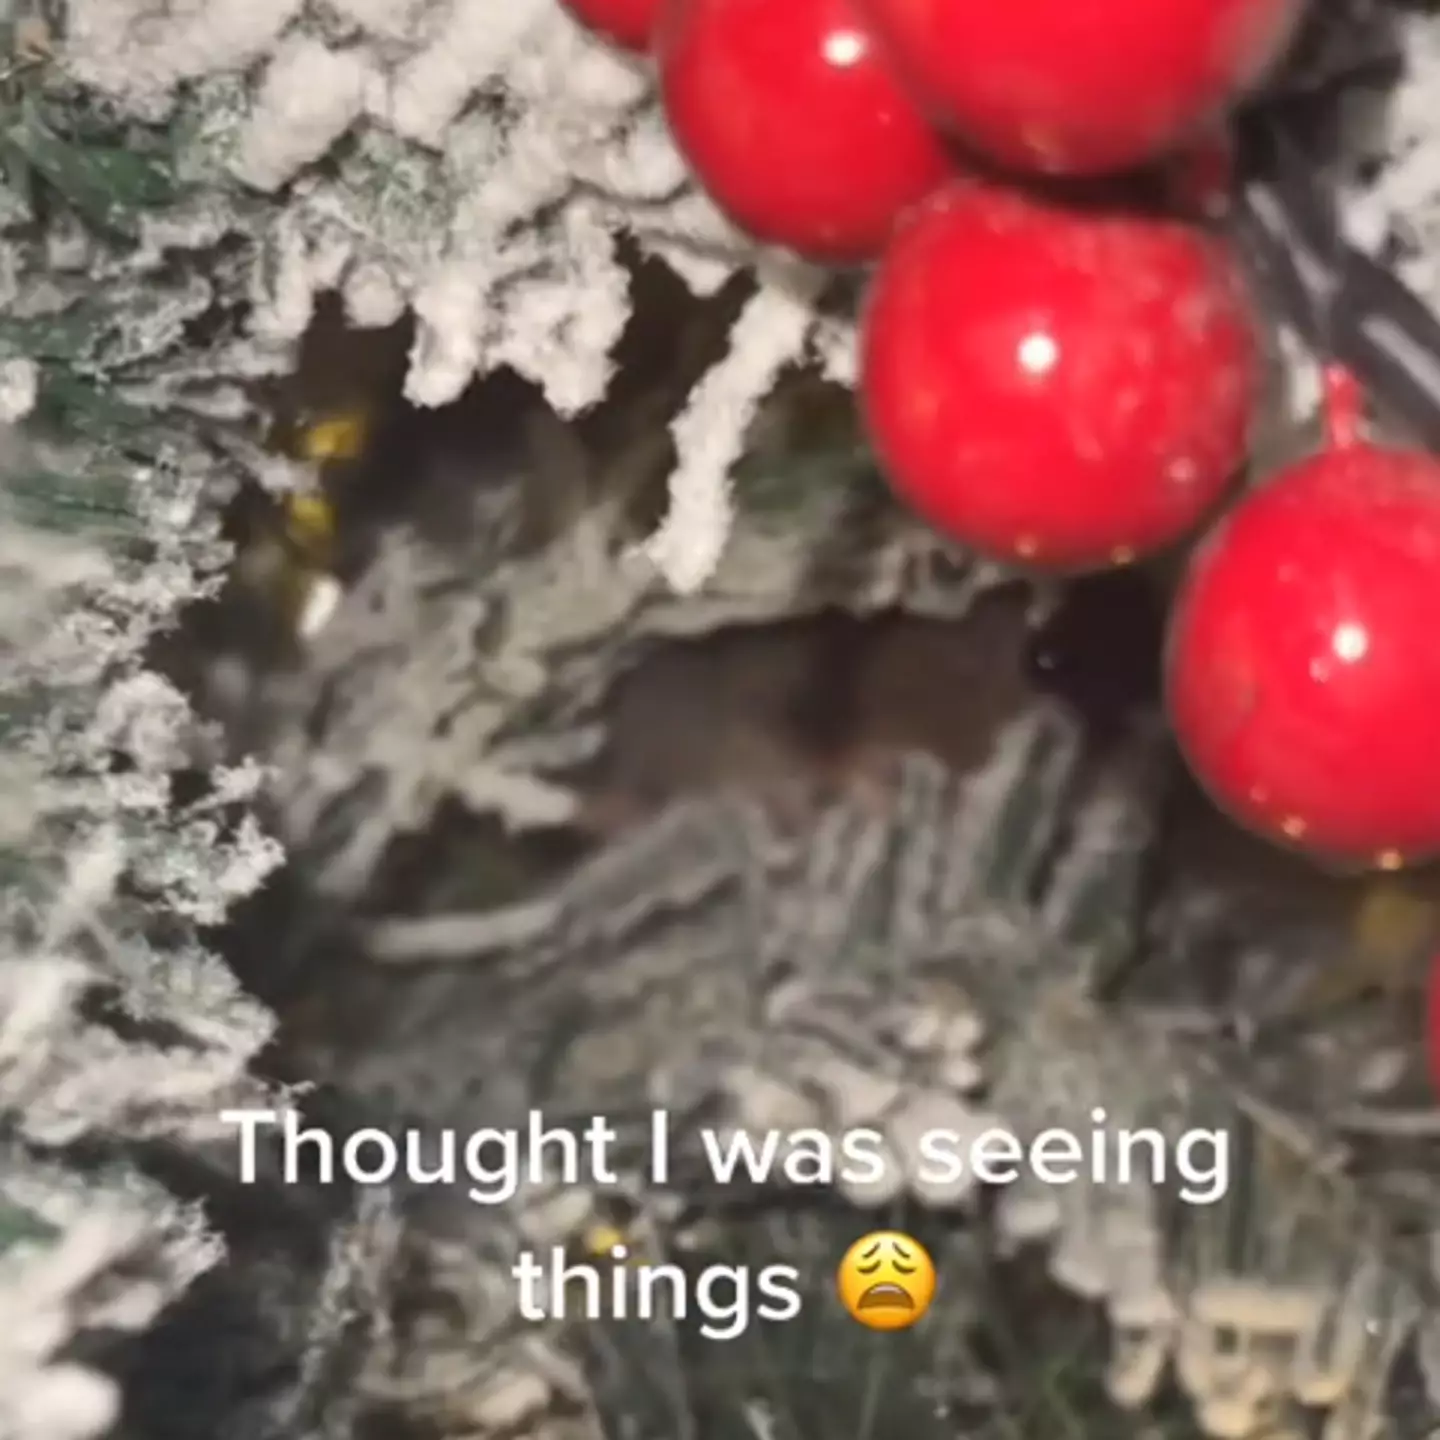 The mouse was hiding in the Christmas tree.